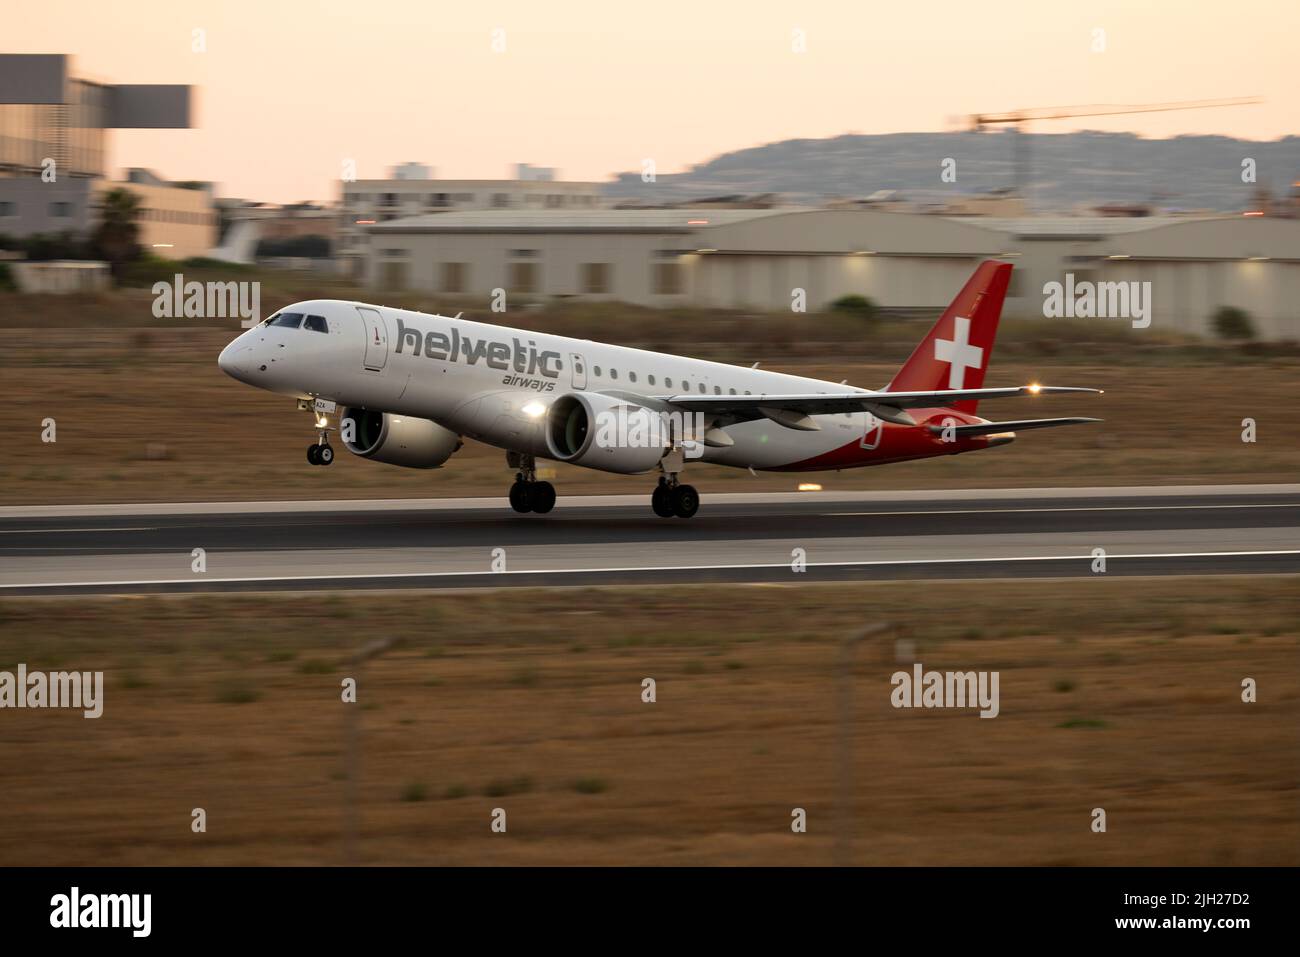 Helvetic Airways Embraer 190 E2 STD (ERJ-190-300STD) (REG: HB-AZA) taking off from 13 after sunset. Stock Photo